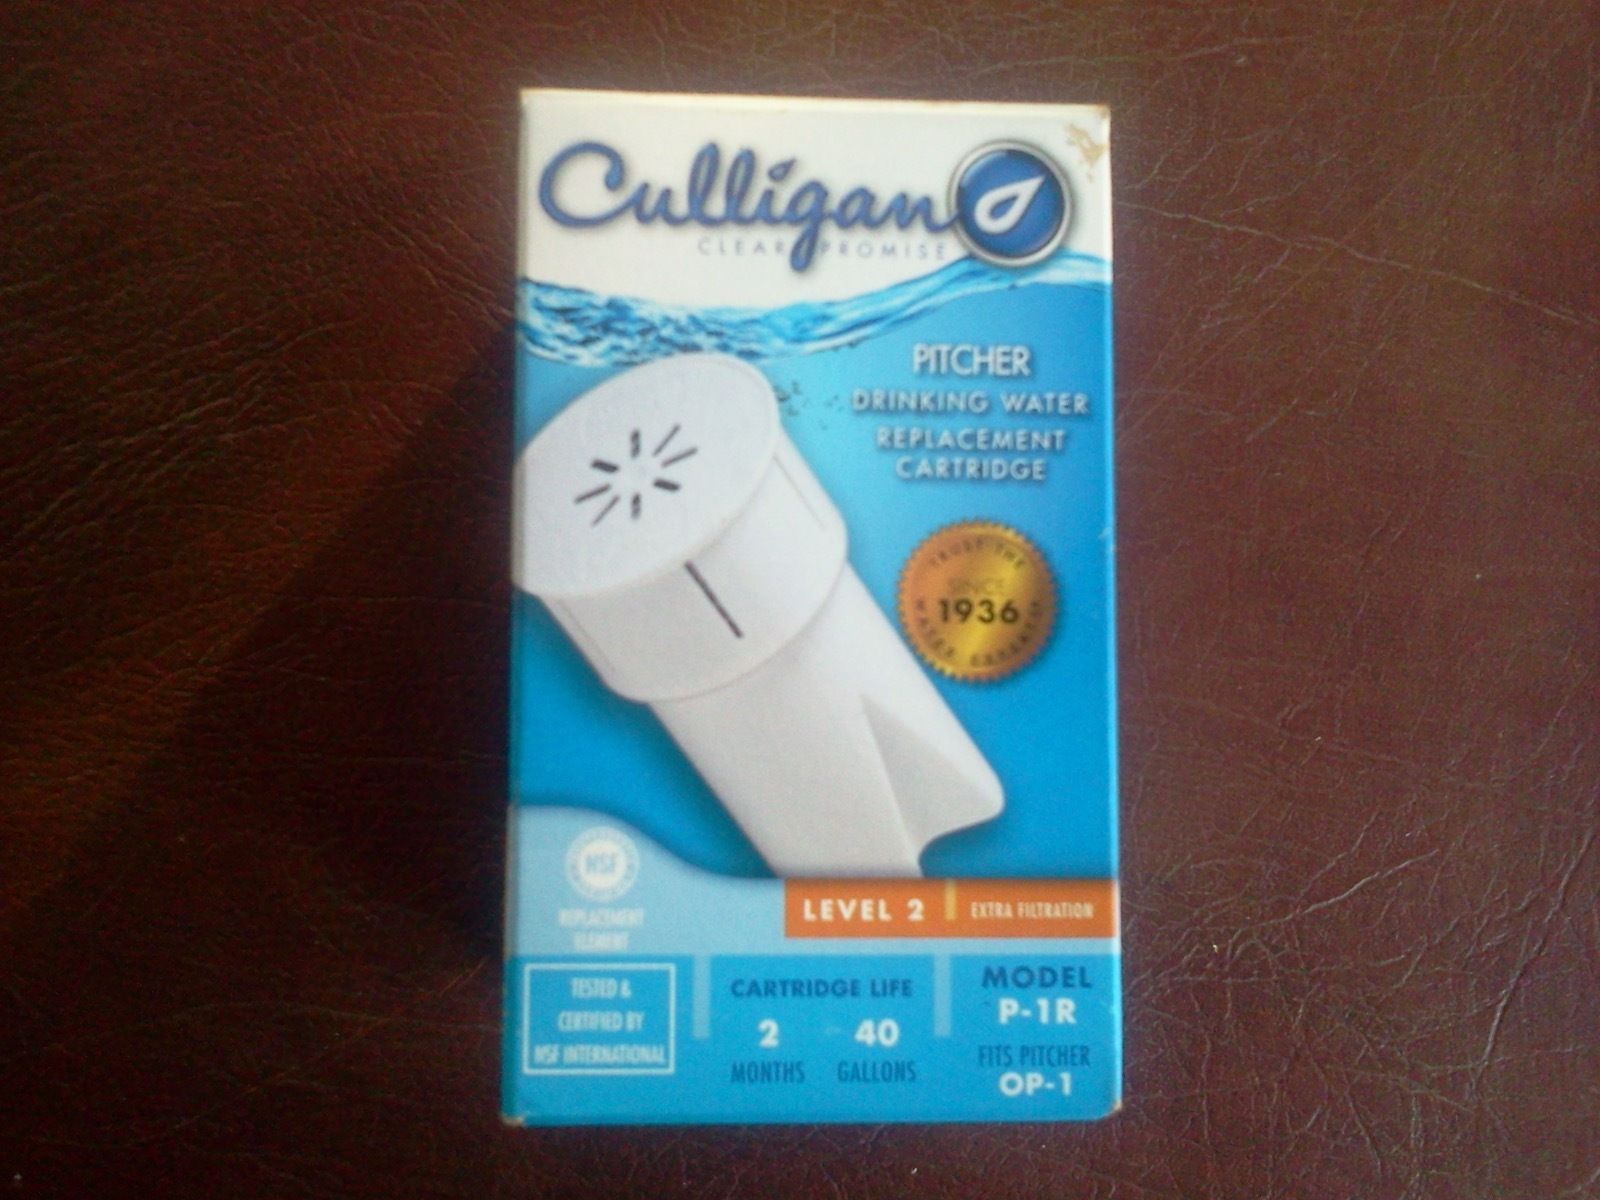 Culligan Pitcher Drinking Water Replacement Cartridge Level 2 Model P-1R NEW - $17.33